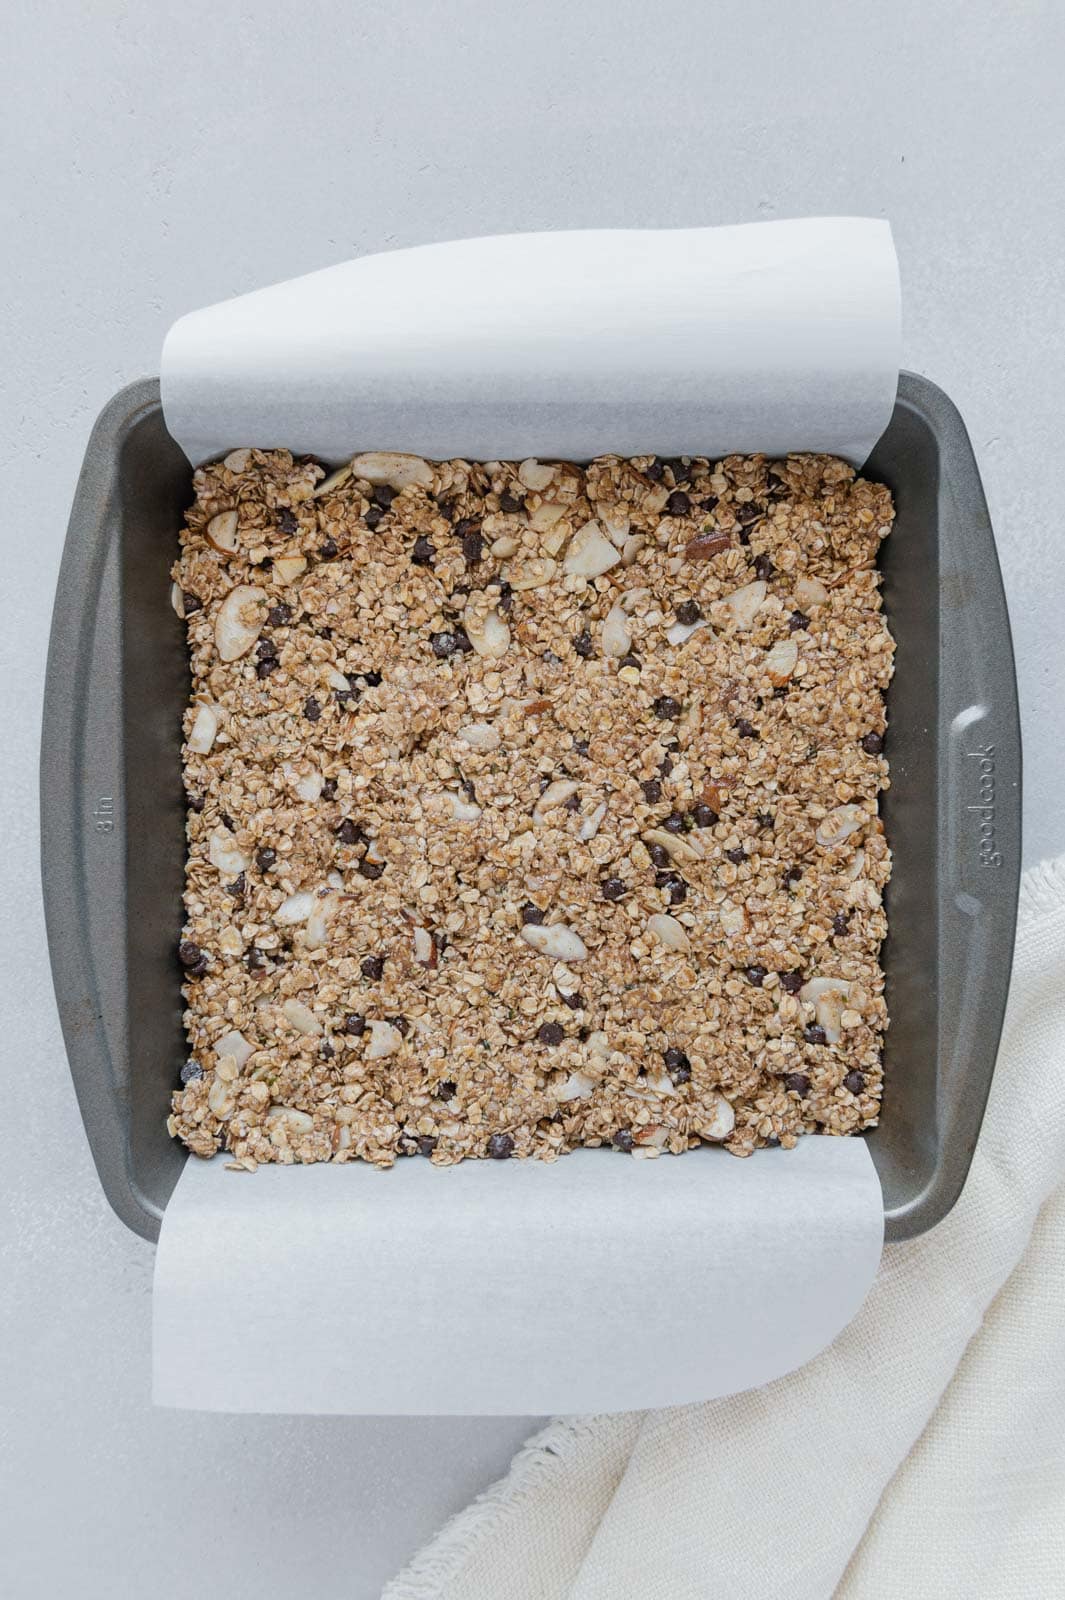 Pressed down granola bar mixture in an 8x8 baking pan ready for the refrigerator.